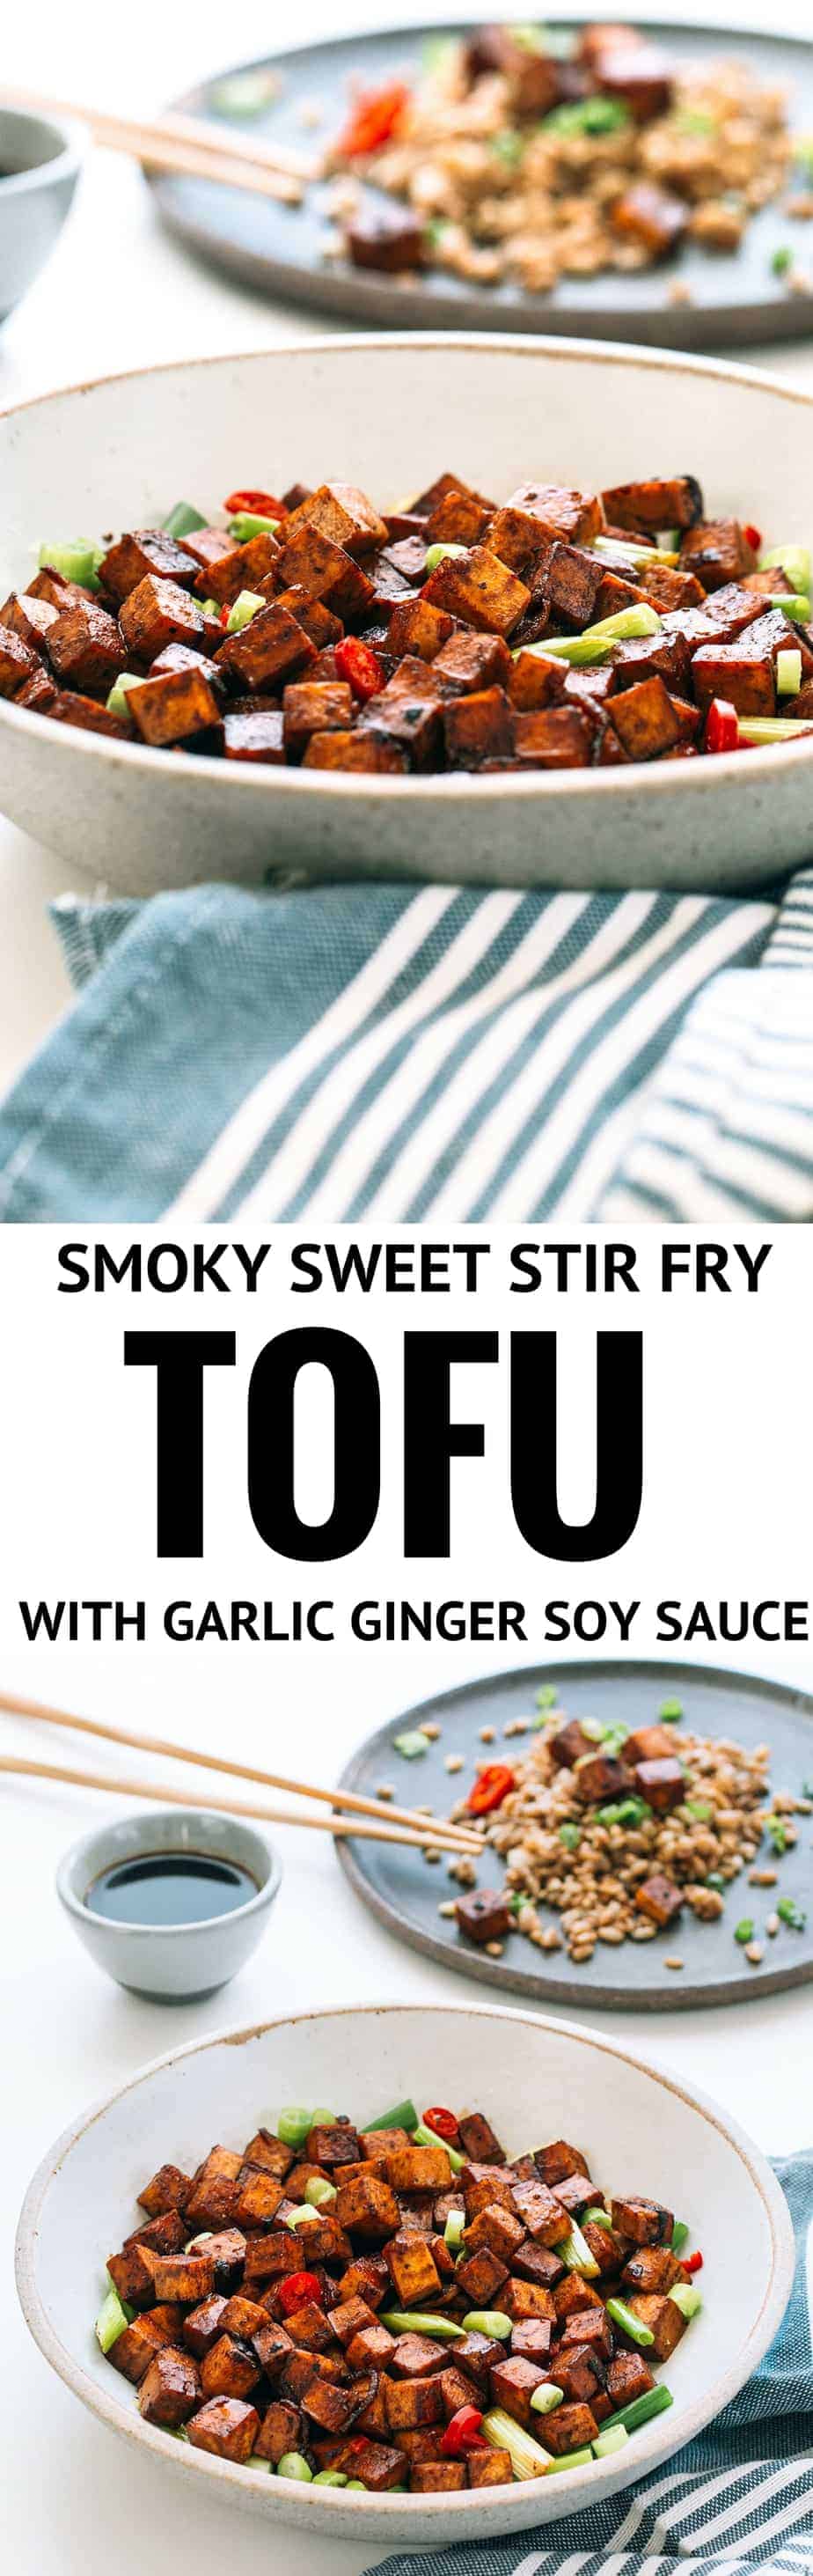 delicious tofu stir-fry marinated in ginger, garlic and soy sauce. It’s unique for tofu with its slightly smoky flavor. Tofu is very high in fiber and protein, it’s also very affordable. For this tofu stir fry recipe, I used a package of extra firm tofu